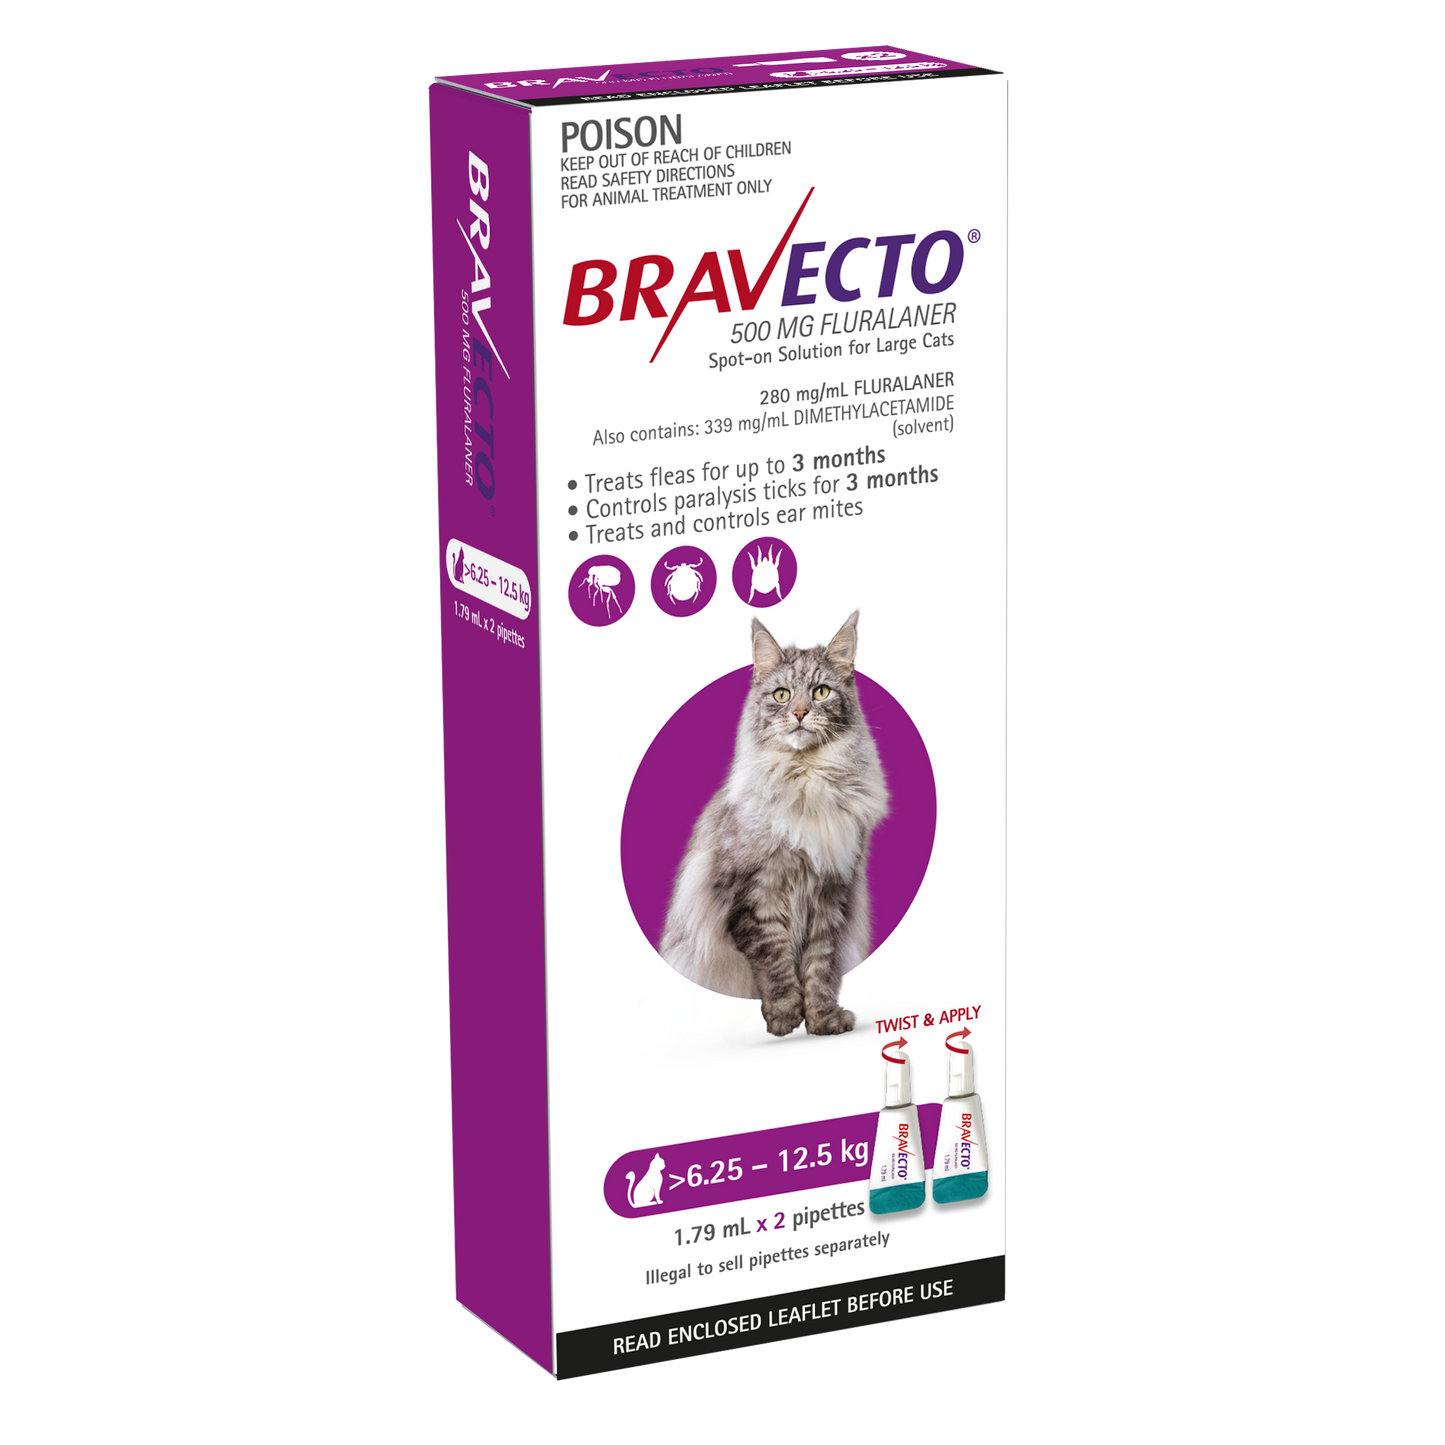 Bravecto Spot-On for Cats, 13.8-27.5lbs (6.25-12.5kg)